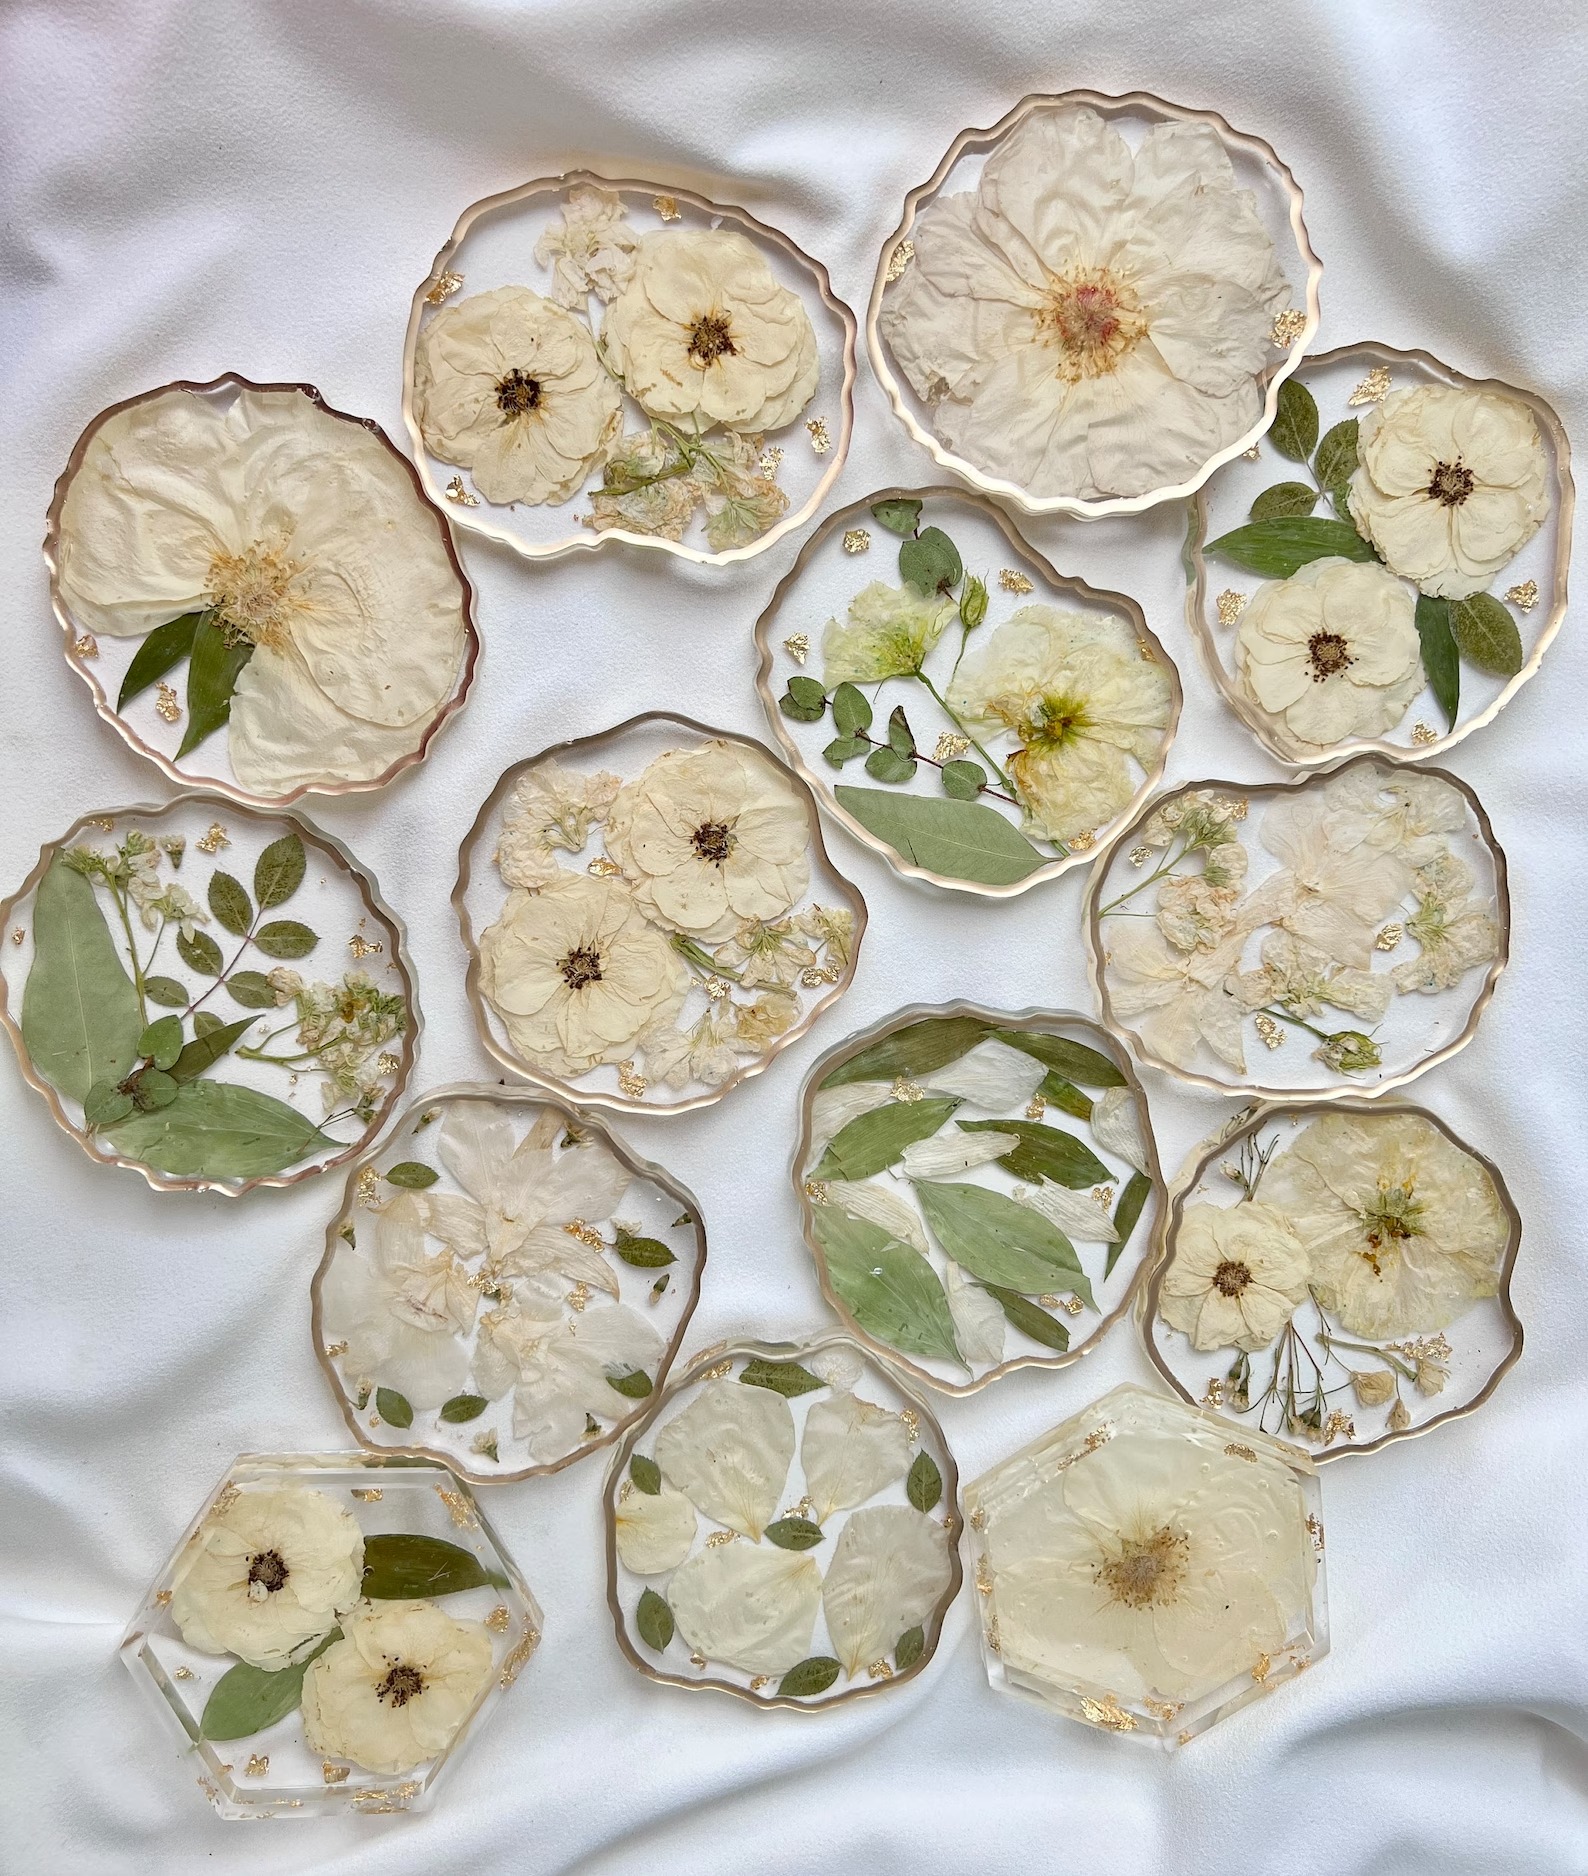 coasters made from wedding flowers